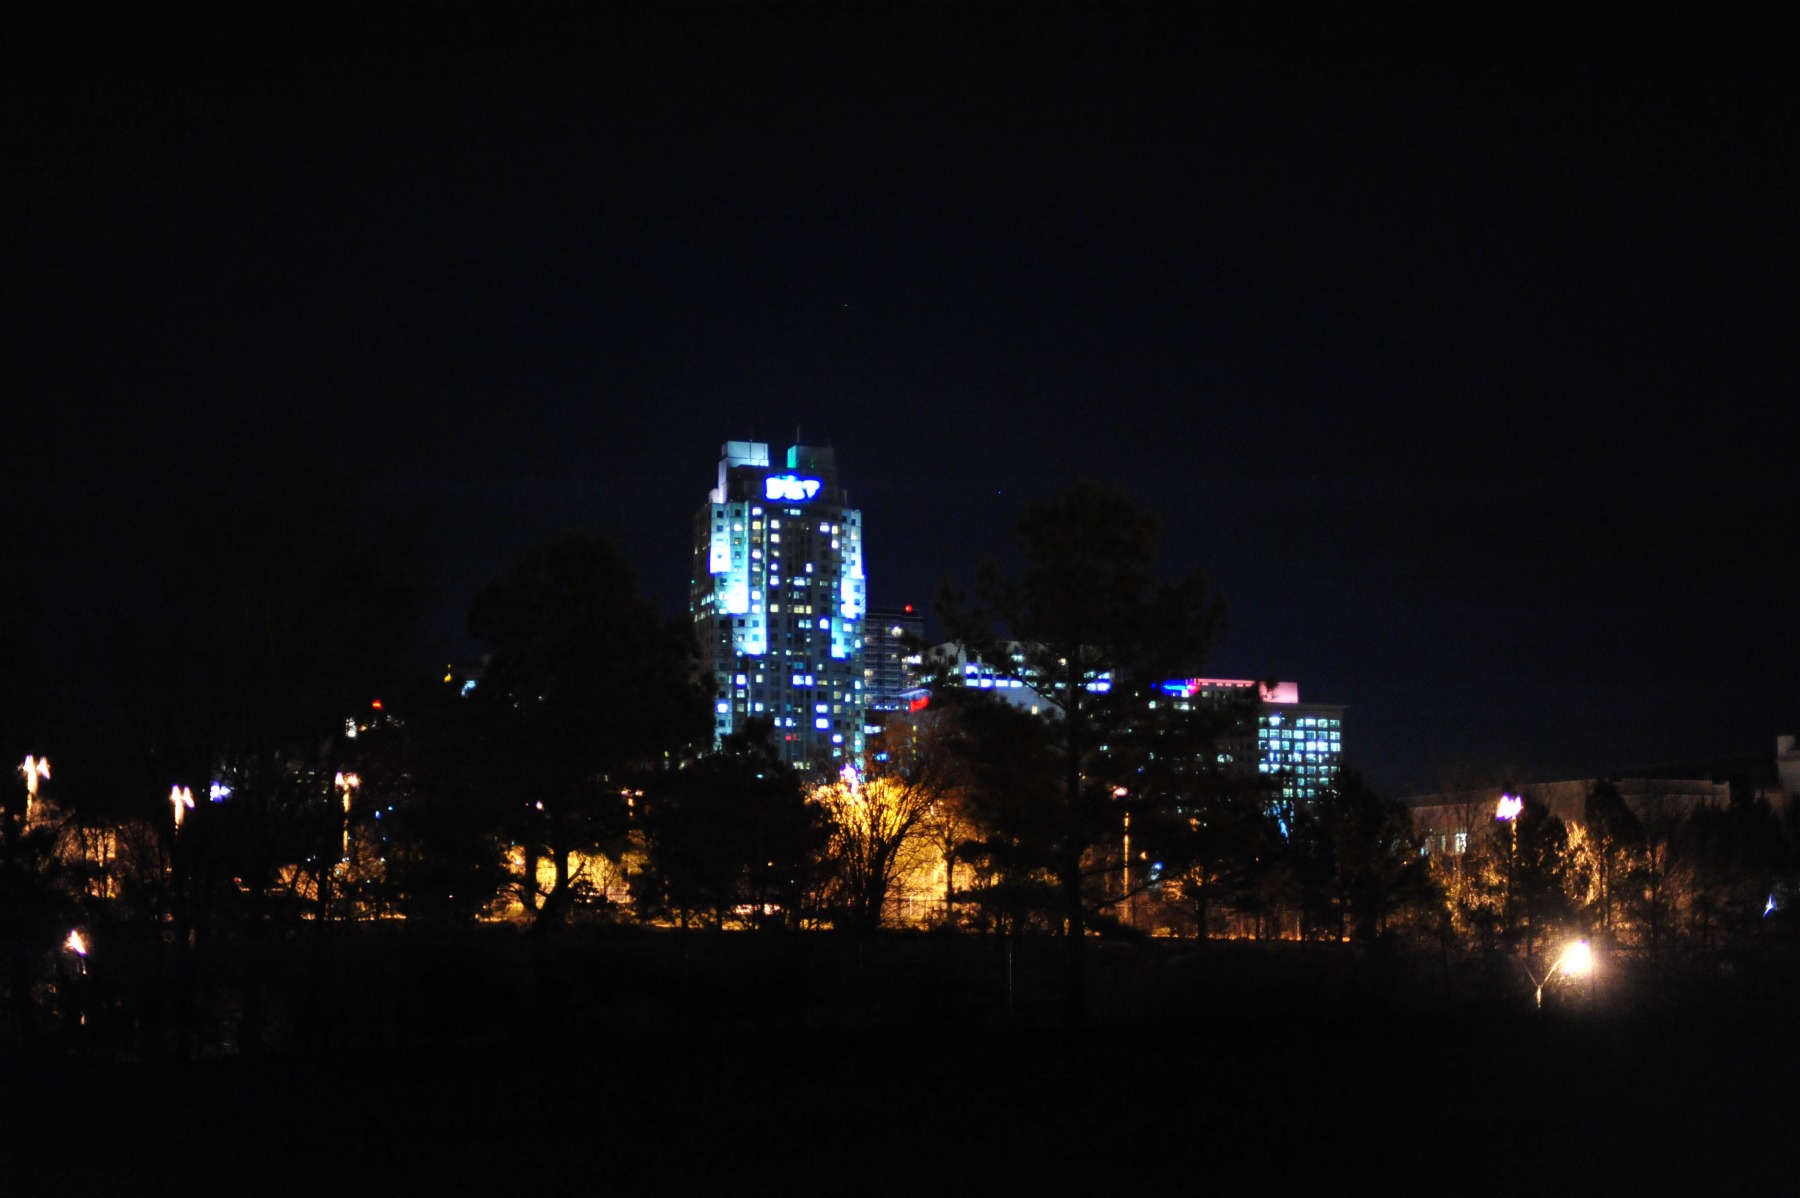 Downtown Raleigh at night!